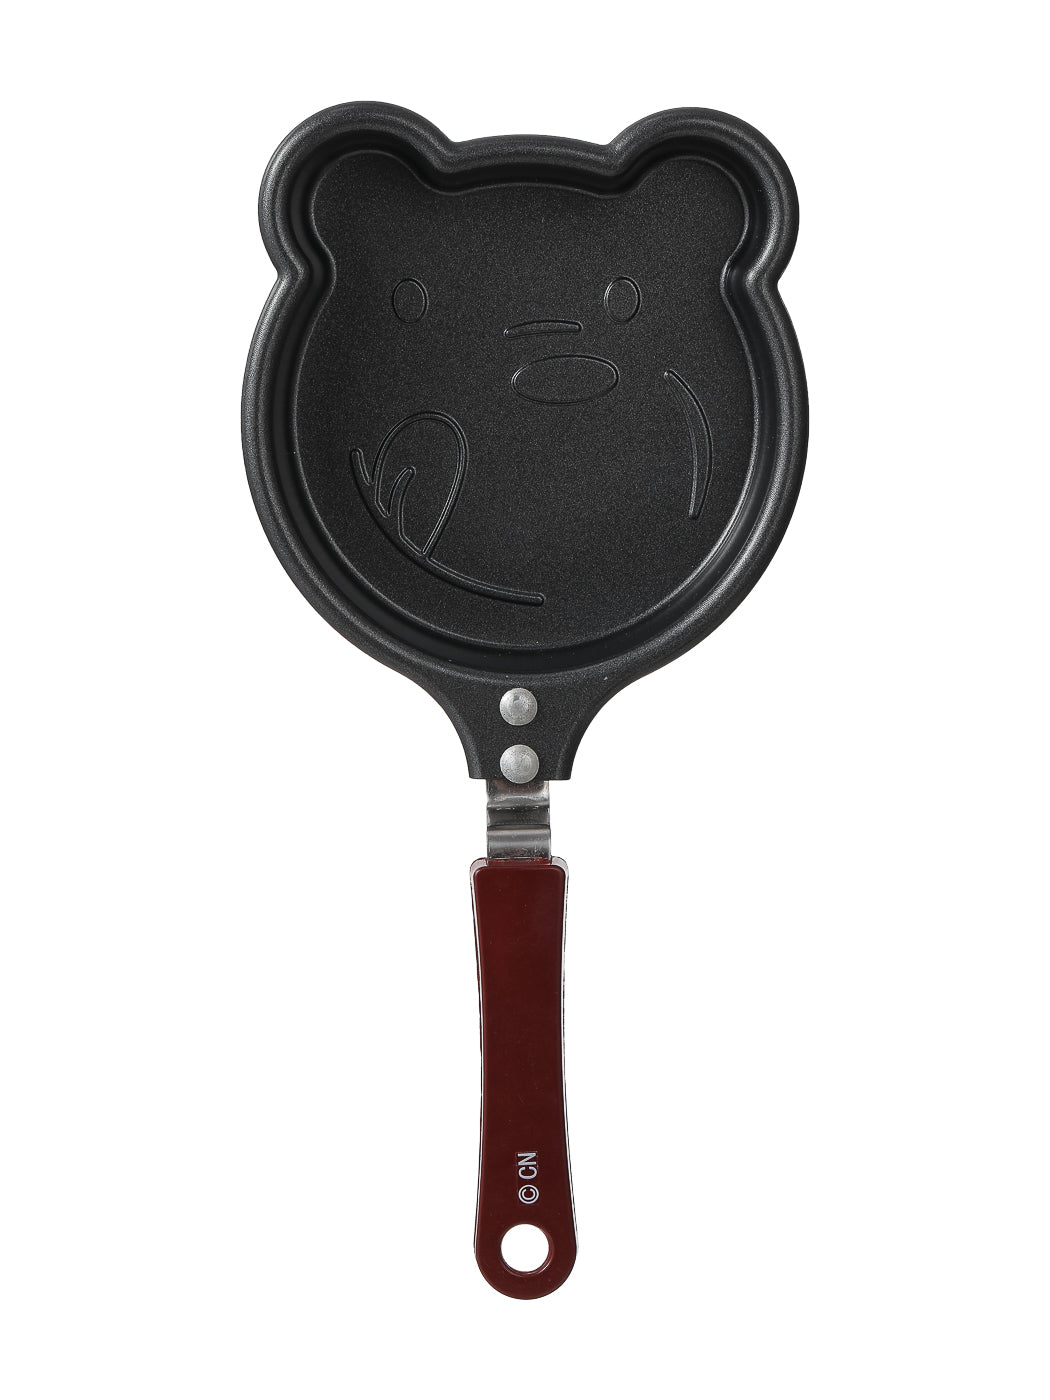 MINISO WE BARE BEARS COLLECTION 4.0 FRYING PAN 13CM(GRIZZLY) 2010665110103 COOKWARE